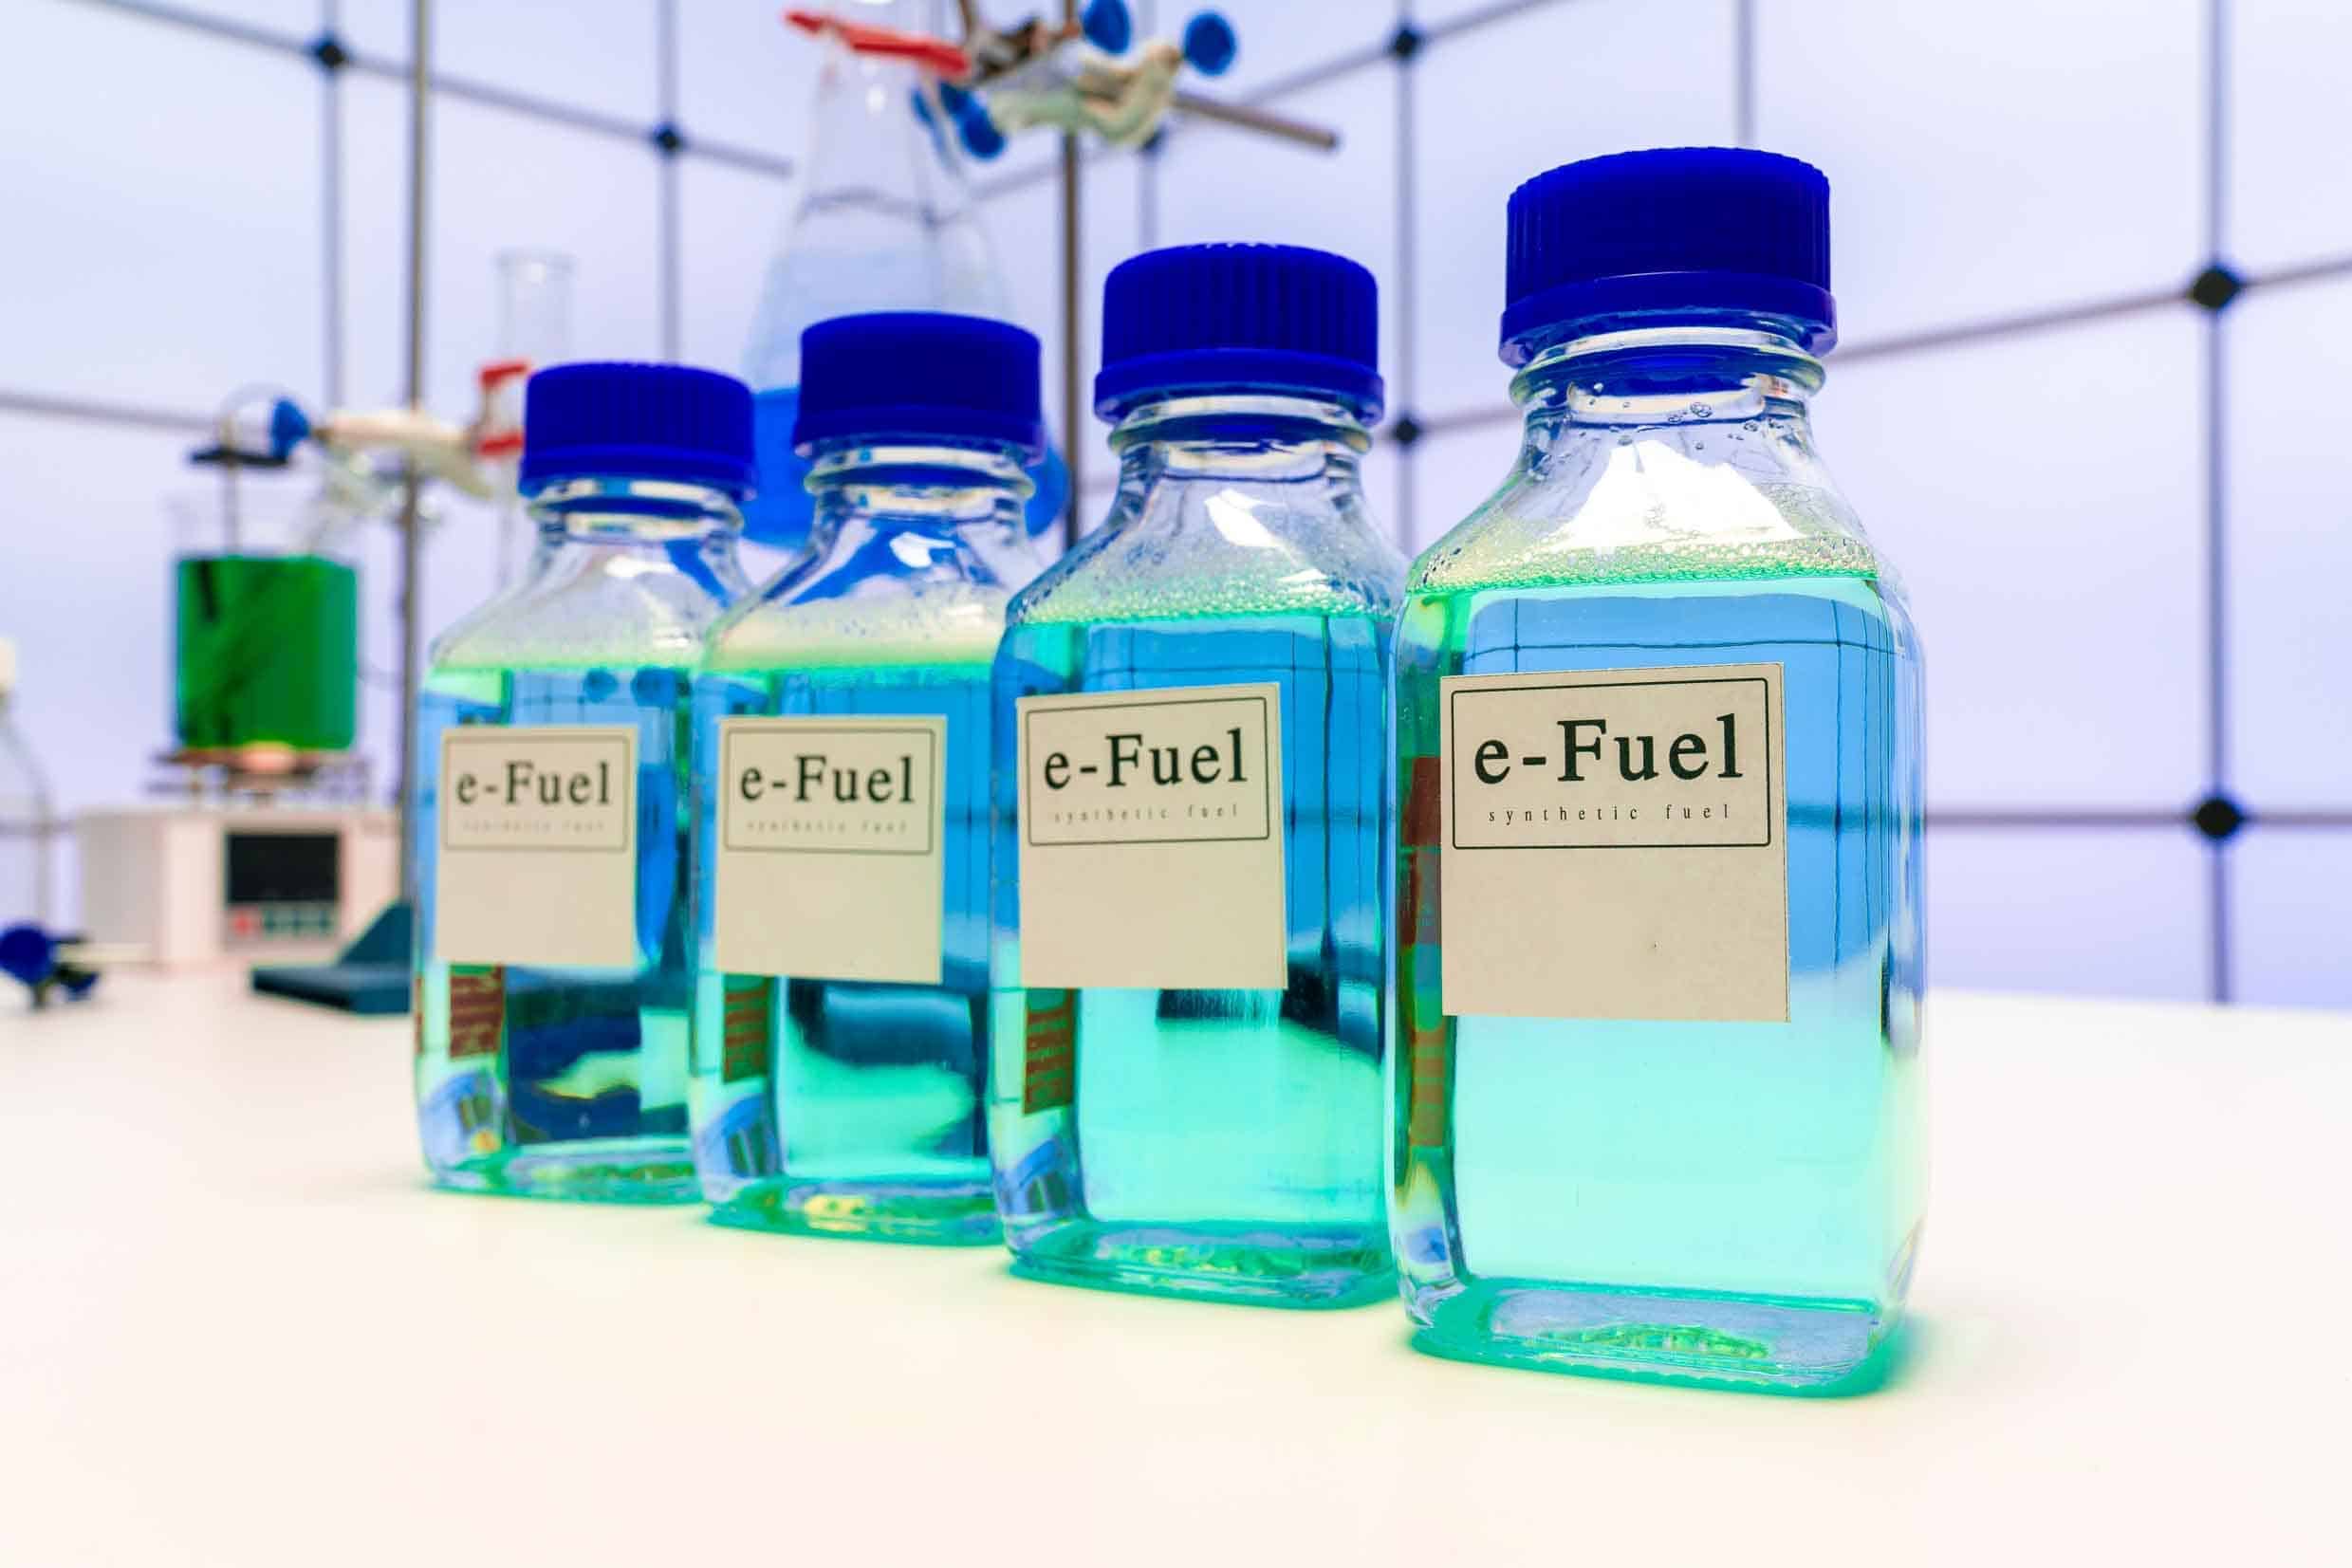 Electrofuels,Or,E-fuels,Or,Synthetic,Fuels,Are,An,Emerging,Class